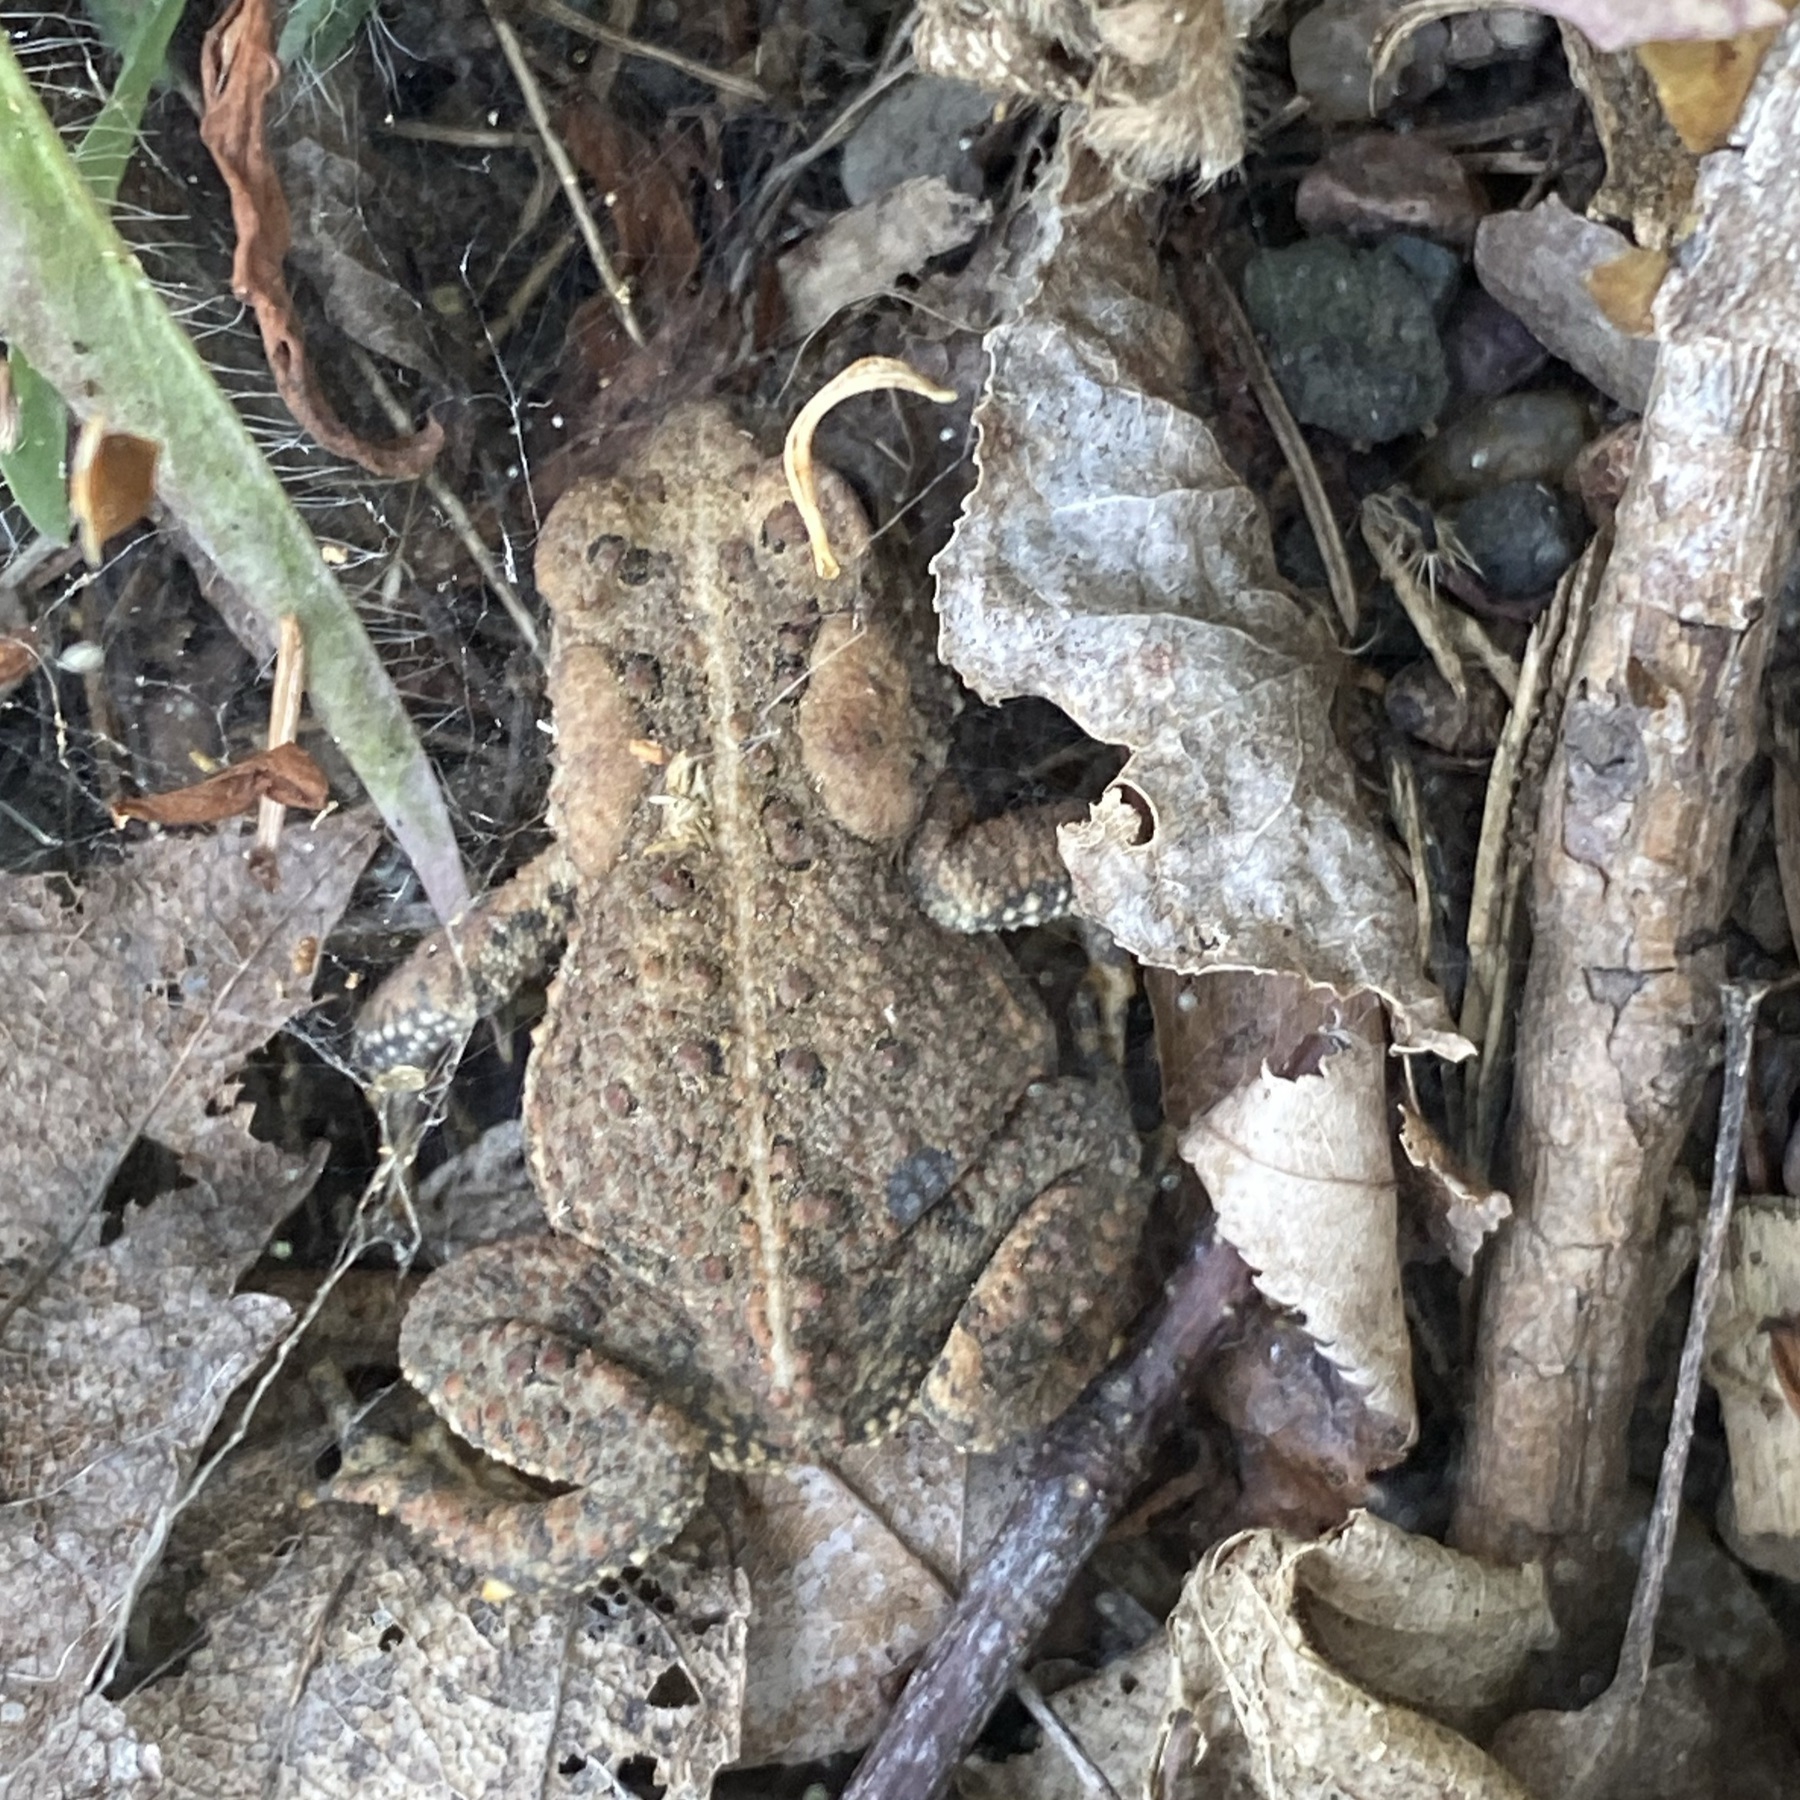 Small frog on ground beside leaves.